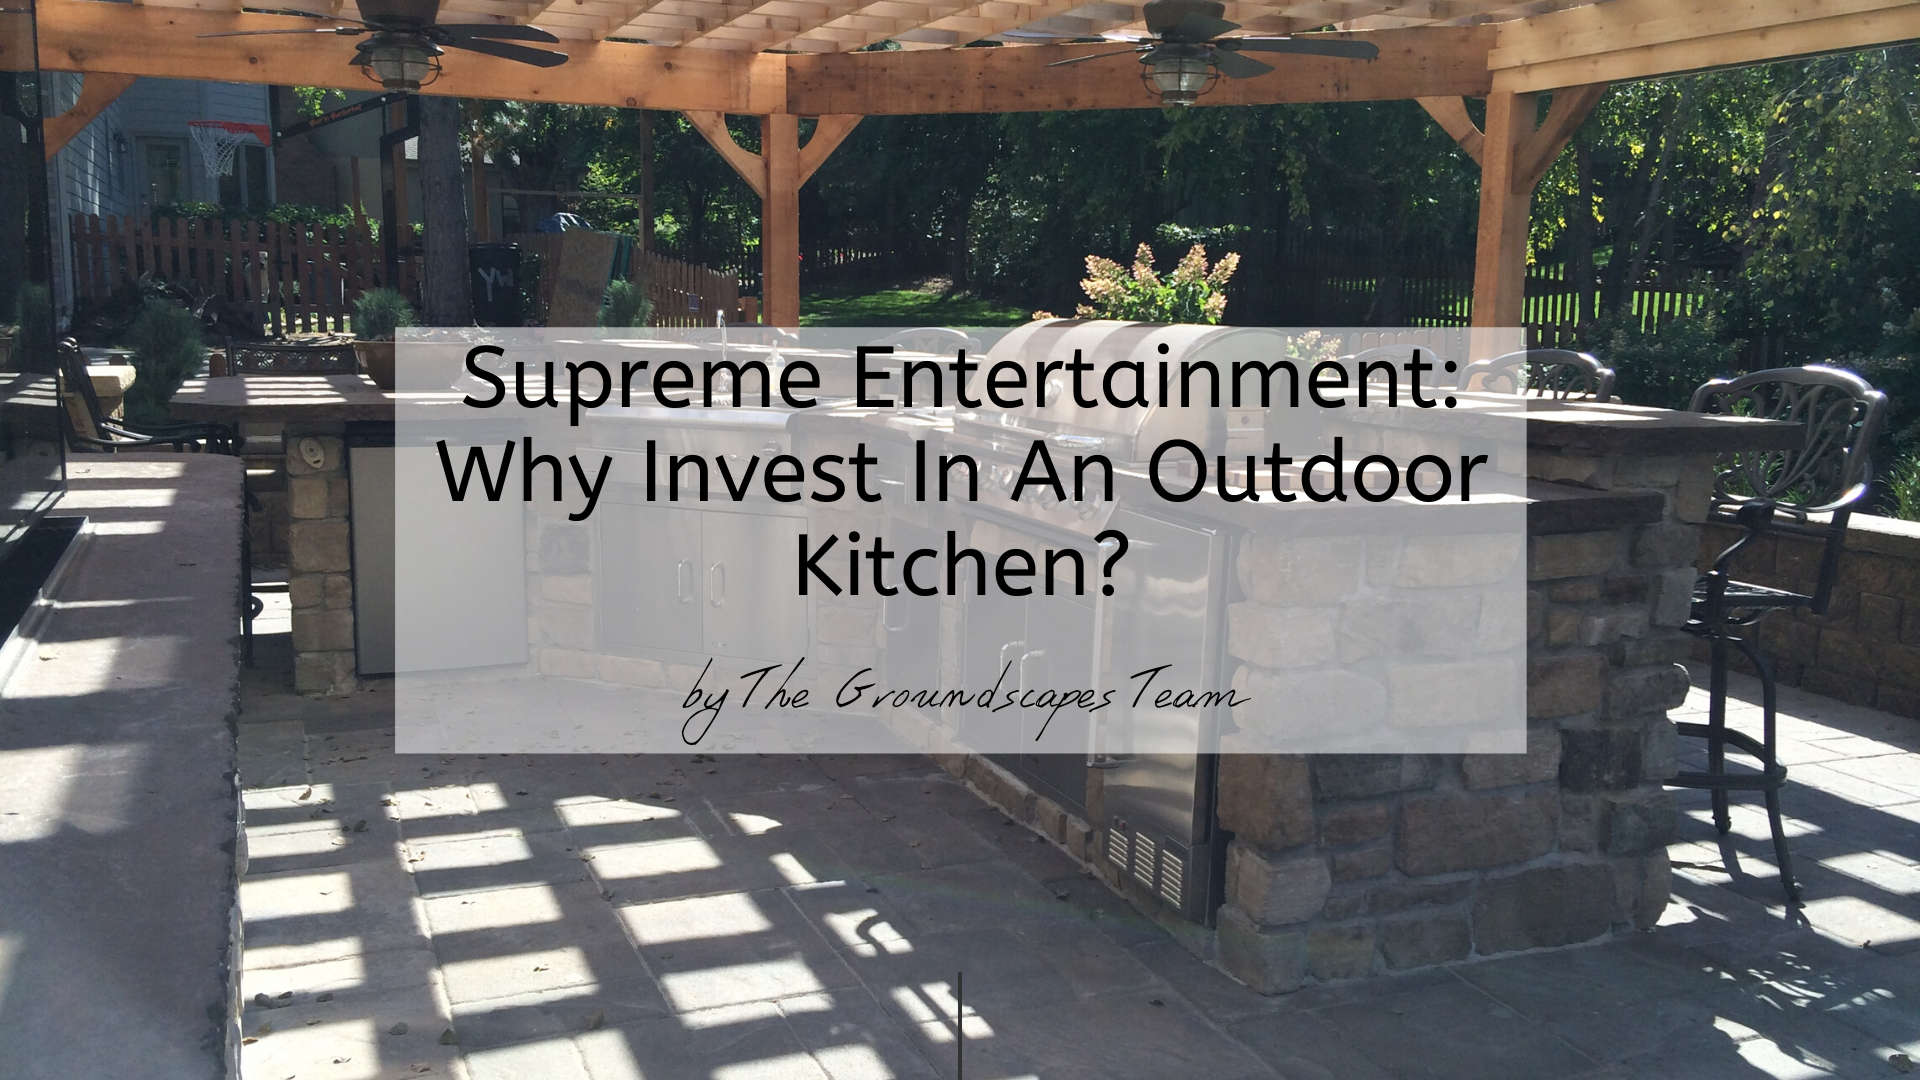 Supreme Entertainment: Why Invest In An Outdoor Kitchen?